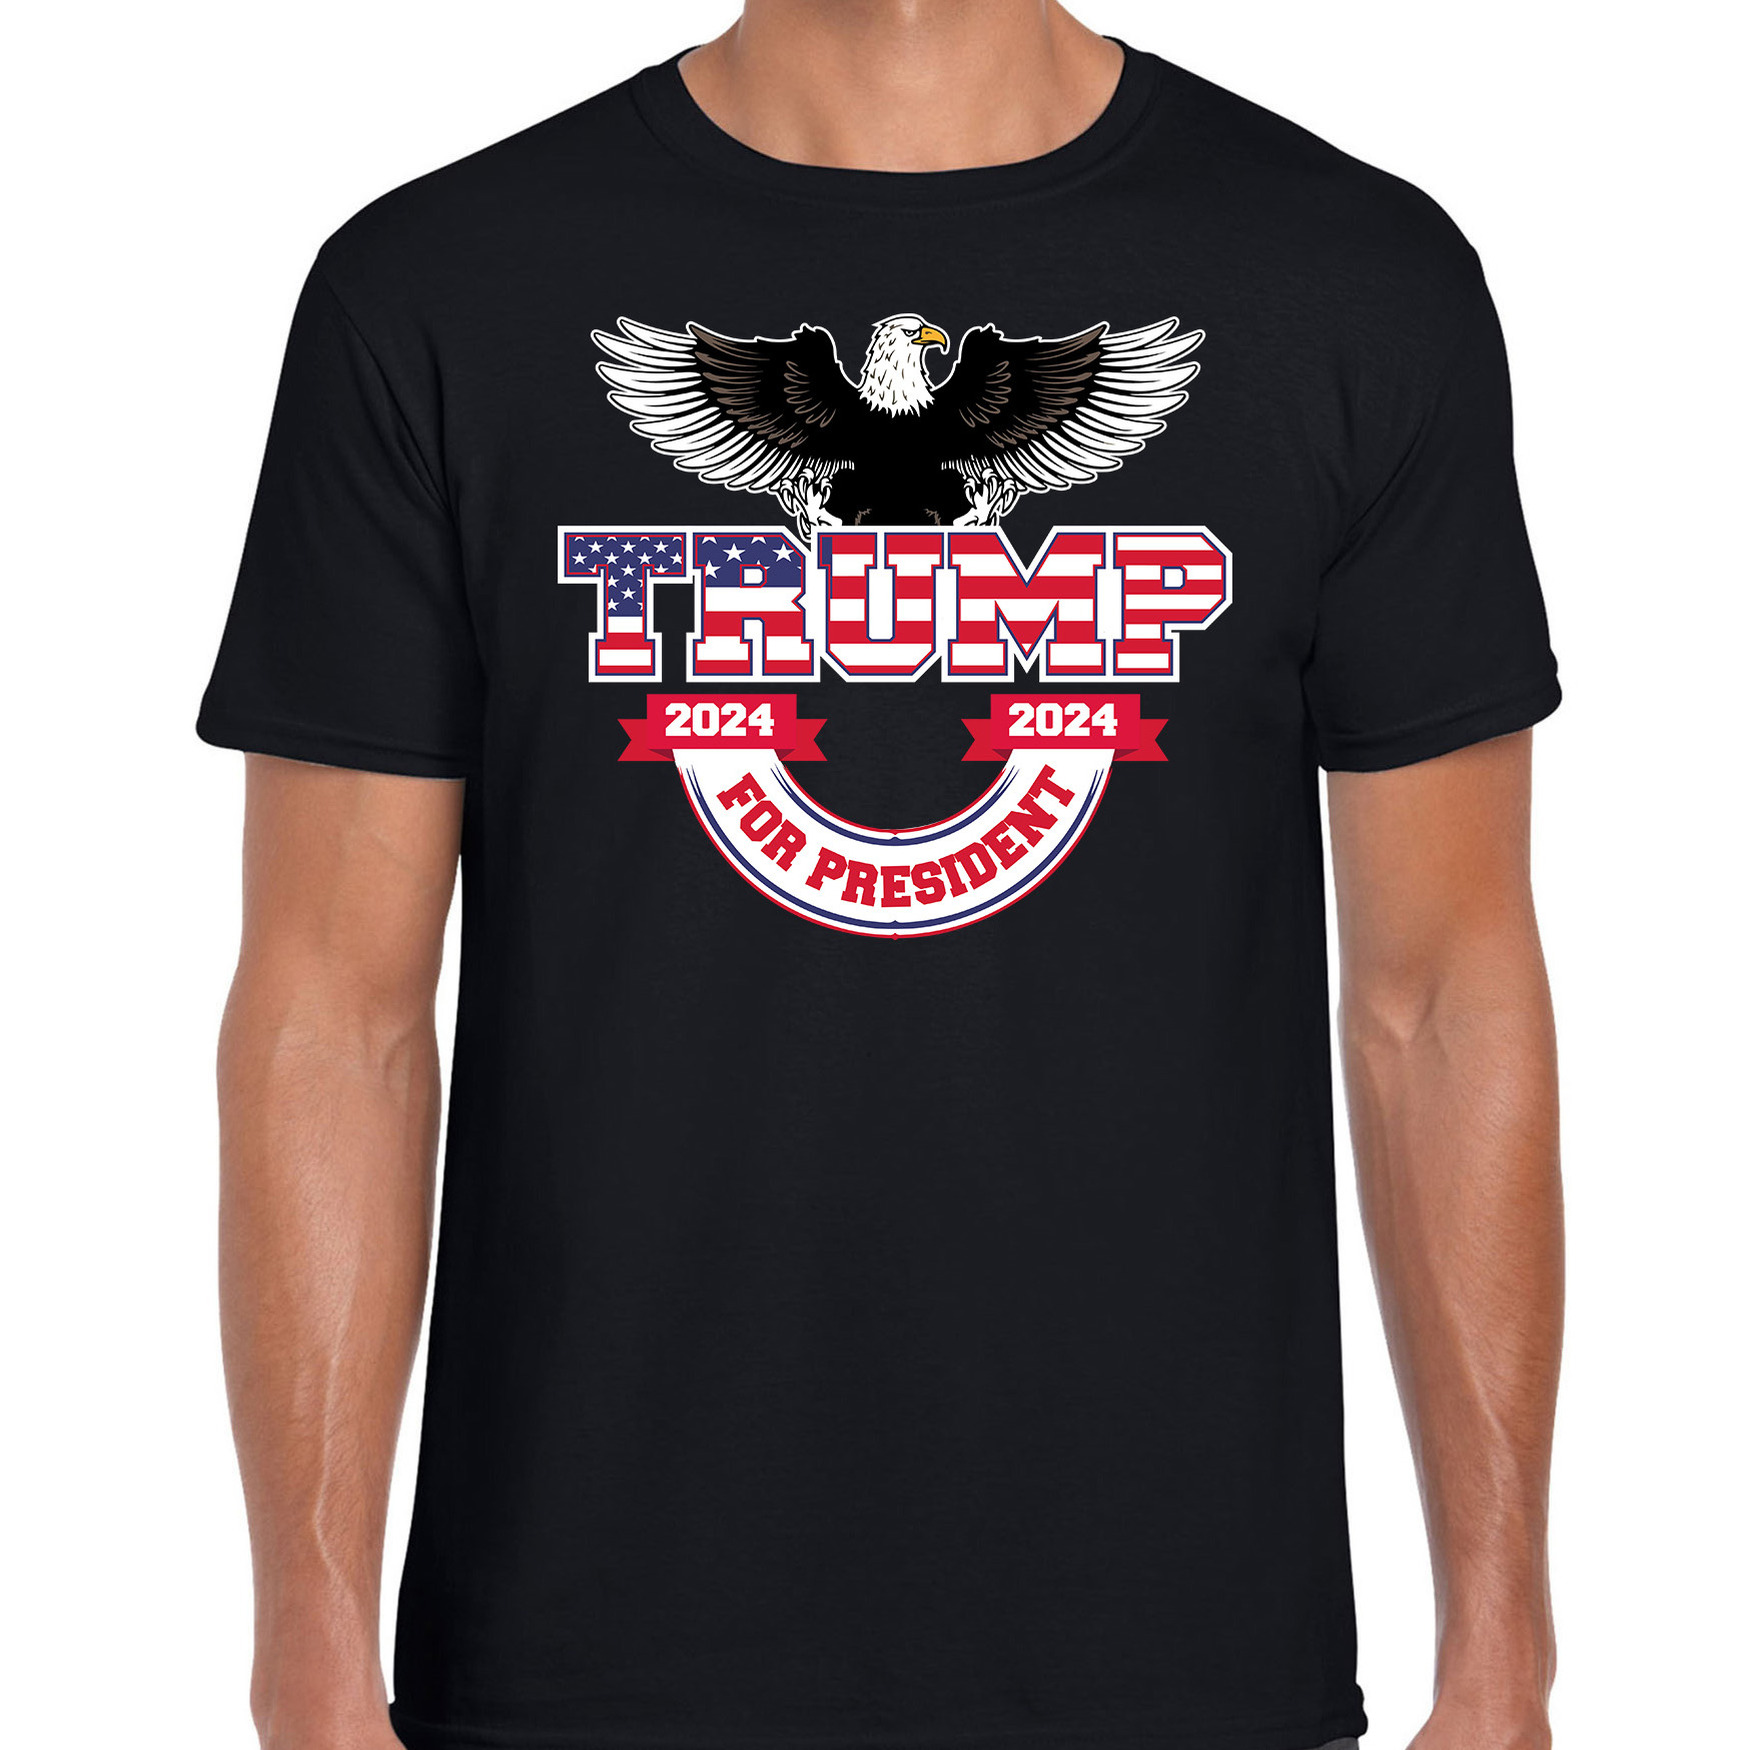 T-shirt Trump heren american eagle grappig-fout voor carnaval